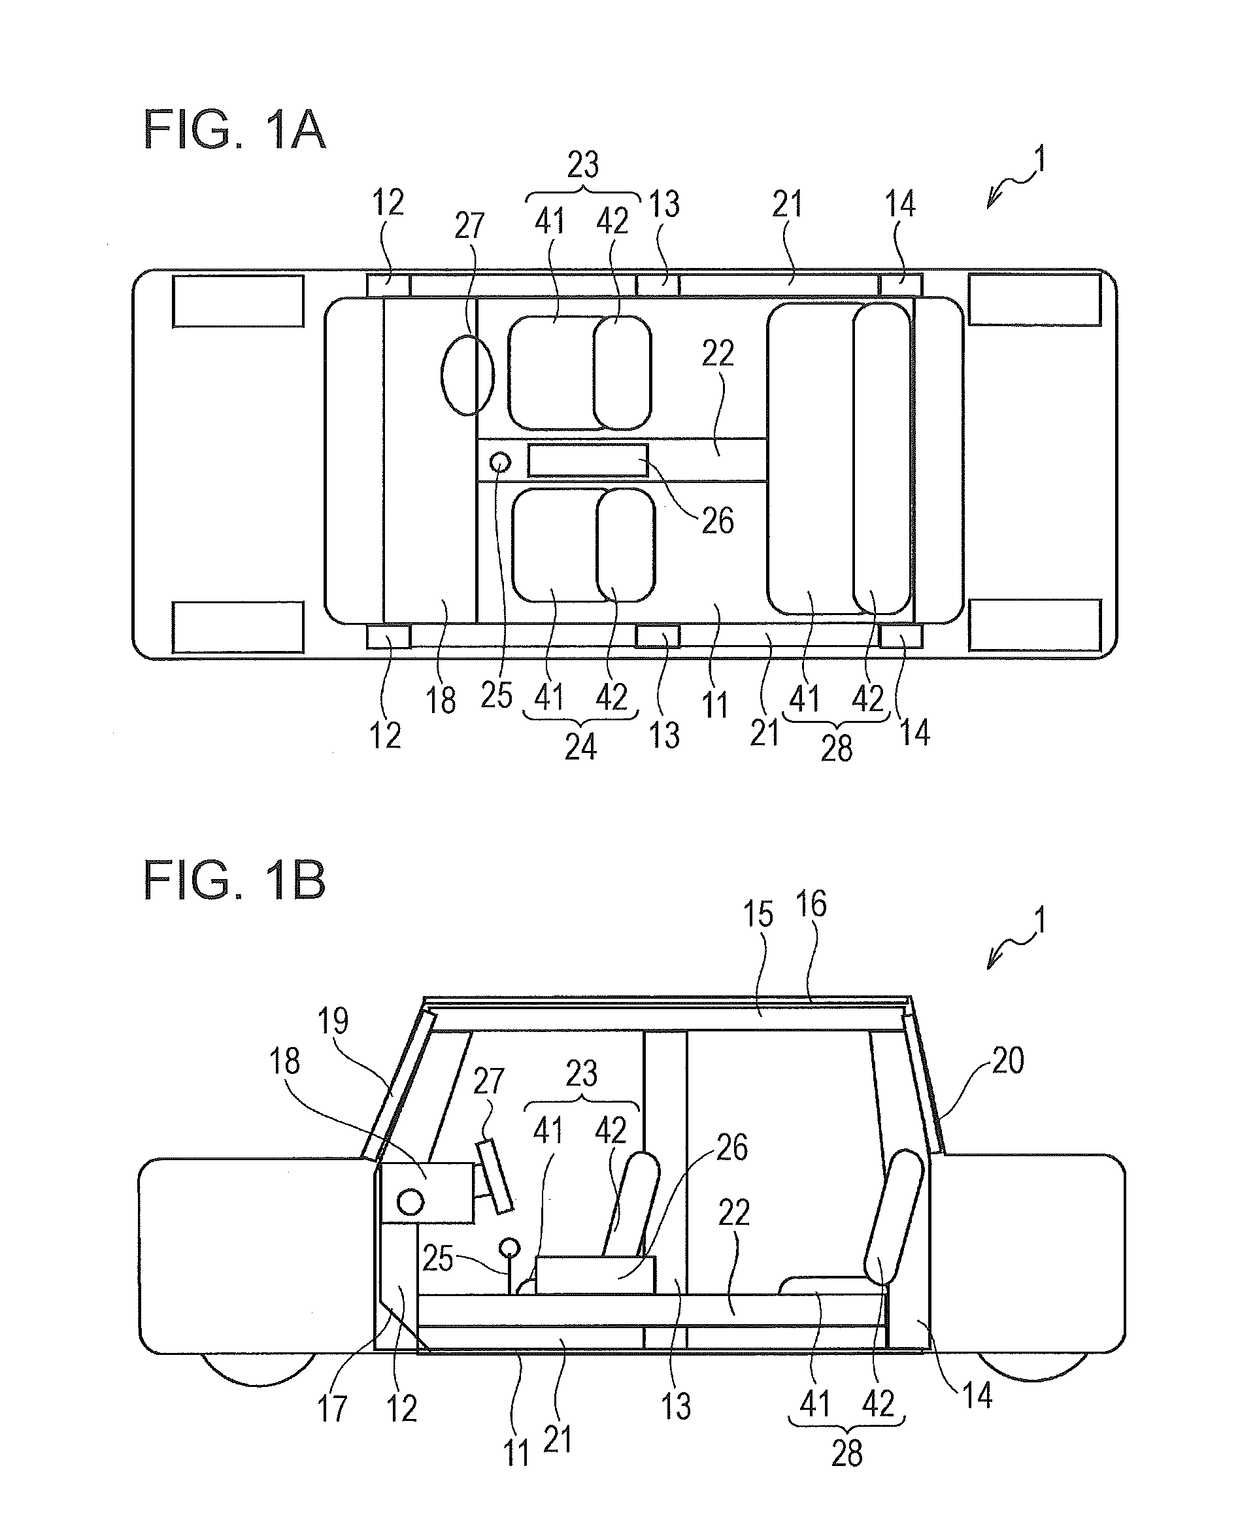 Vehicle occupant protection device